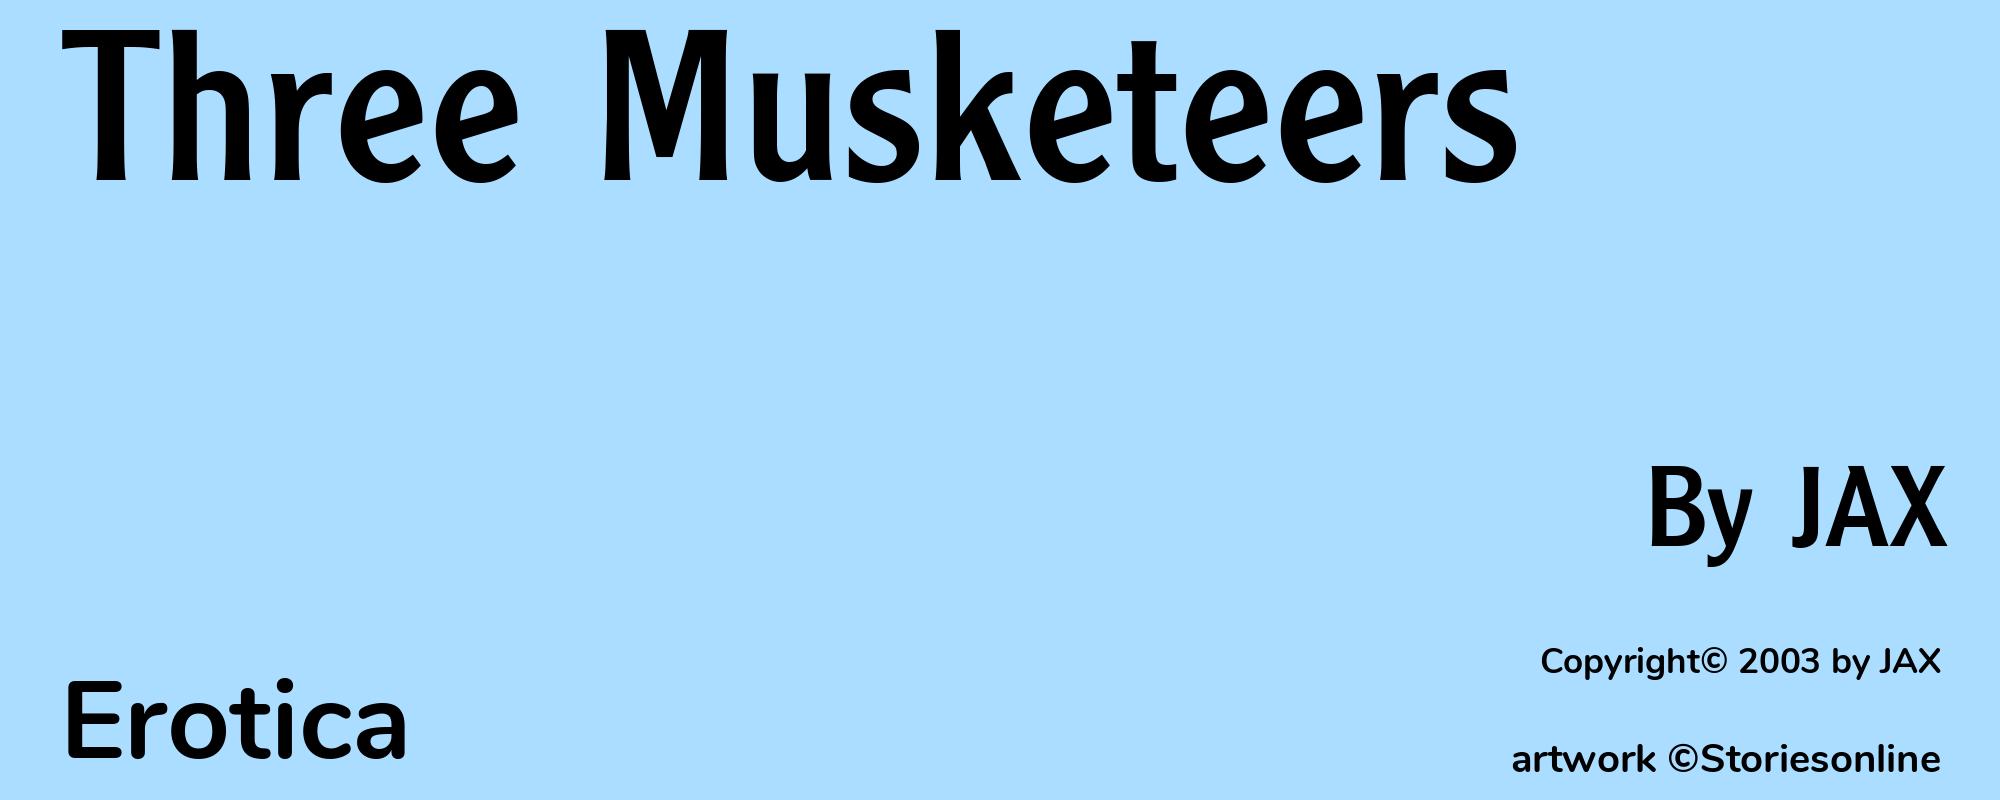 Three Musketeers - Cover